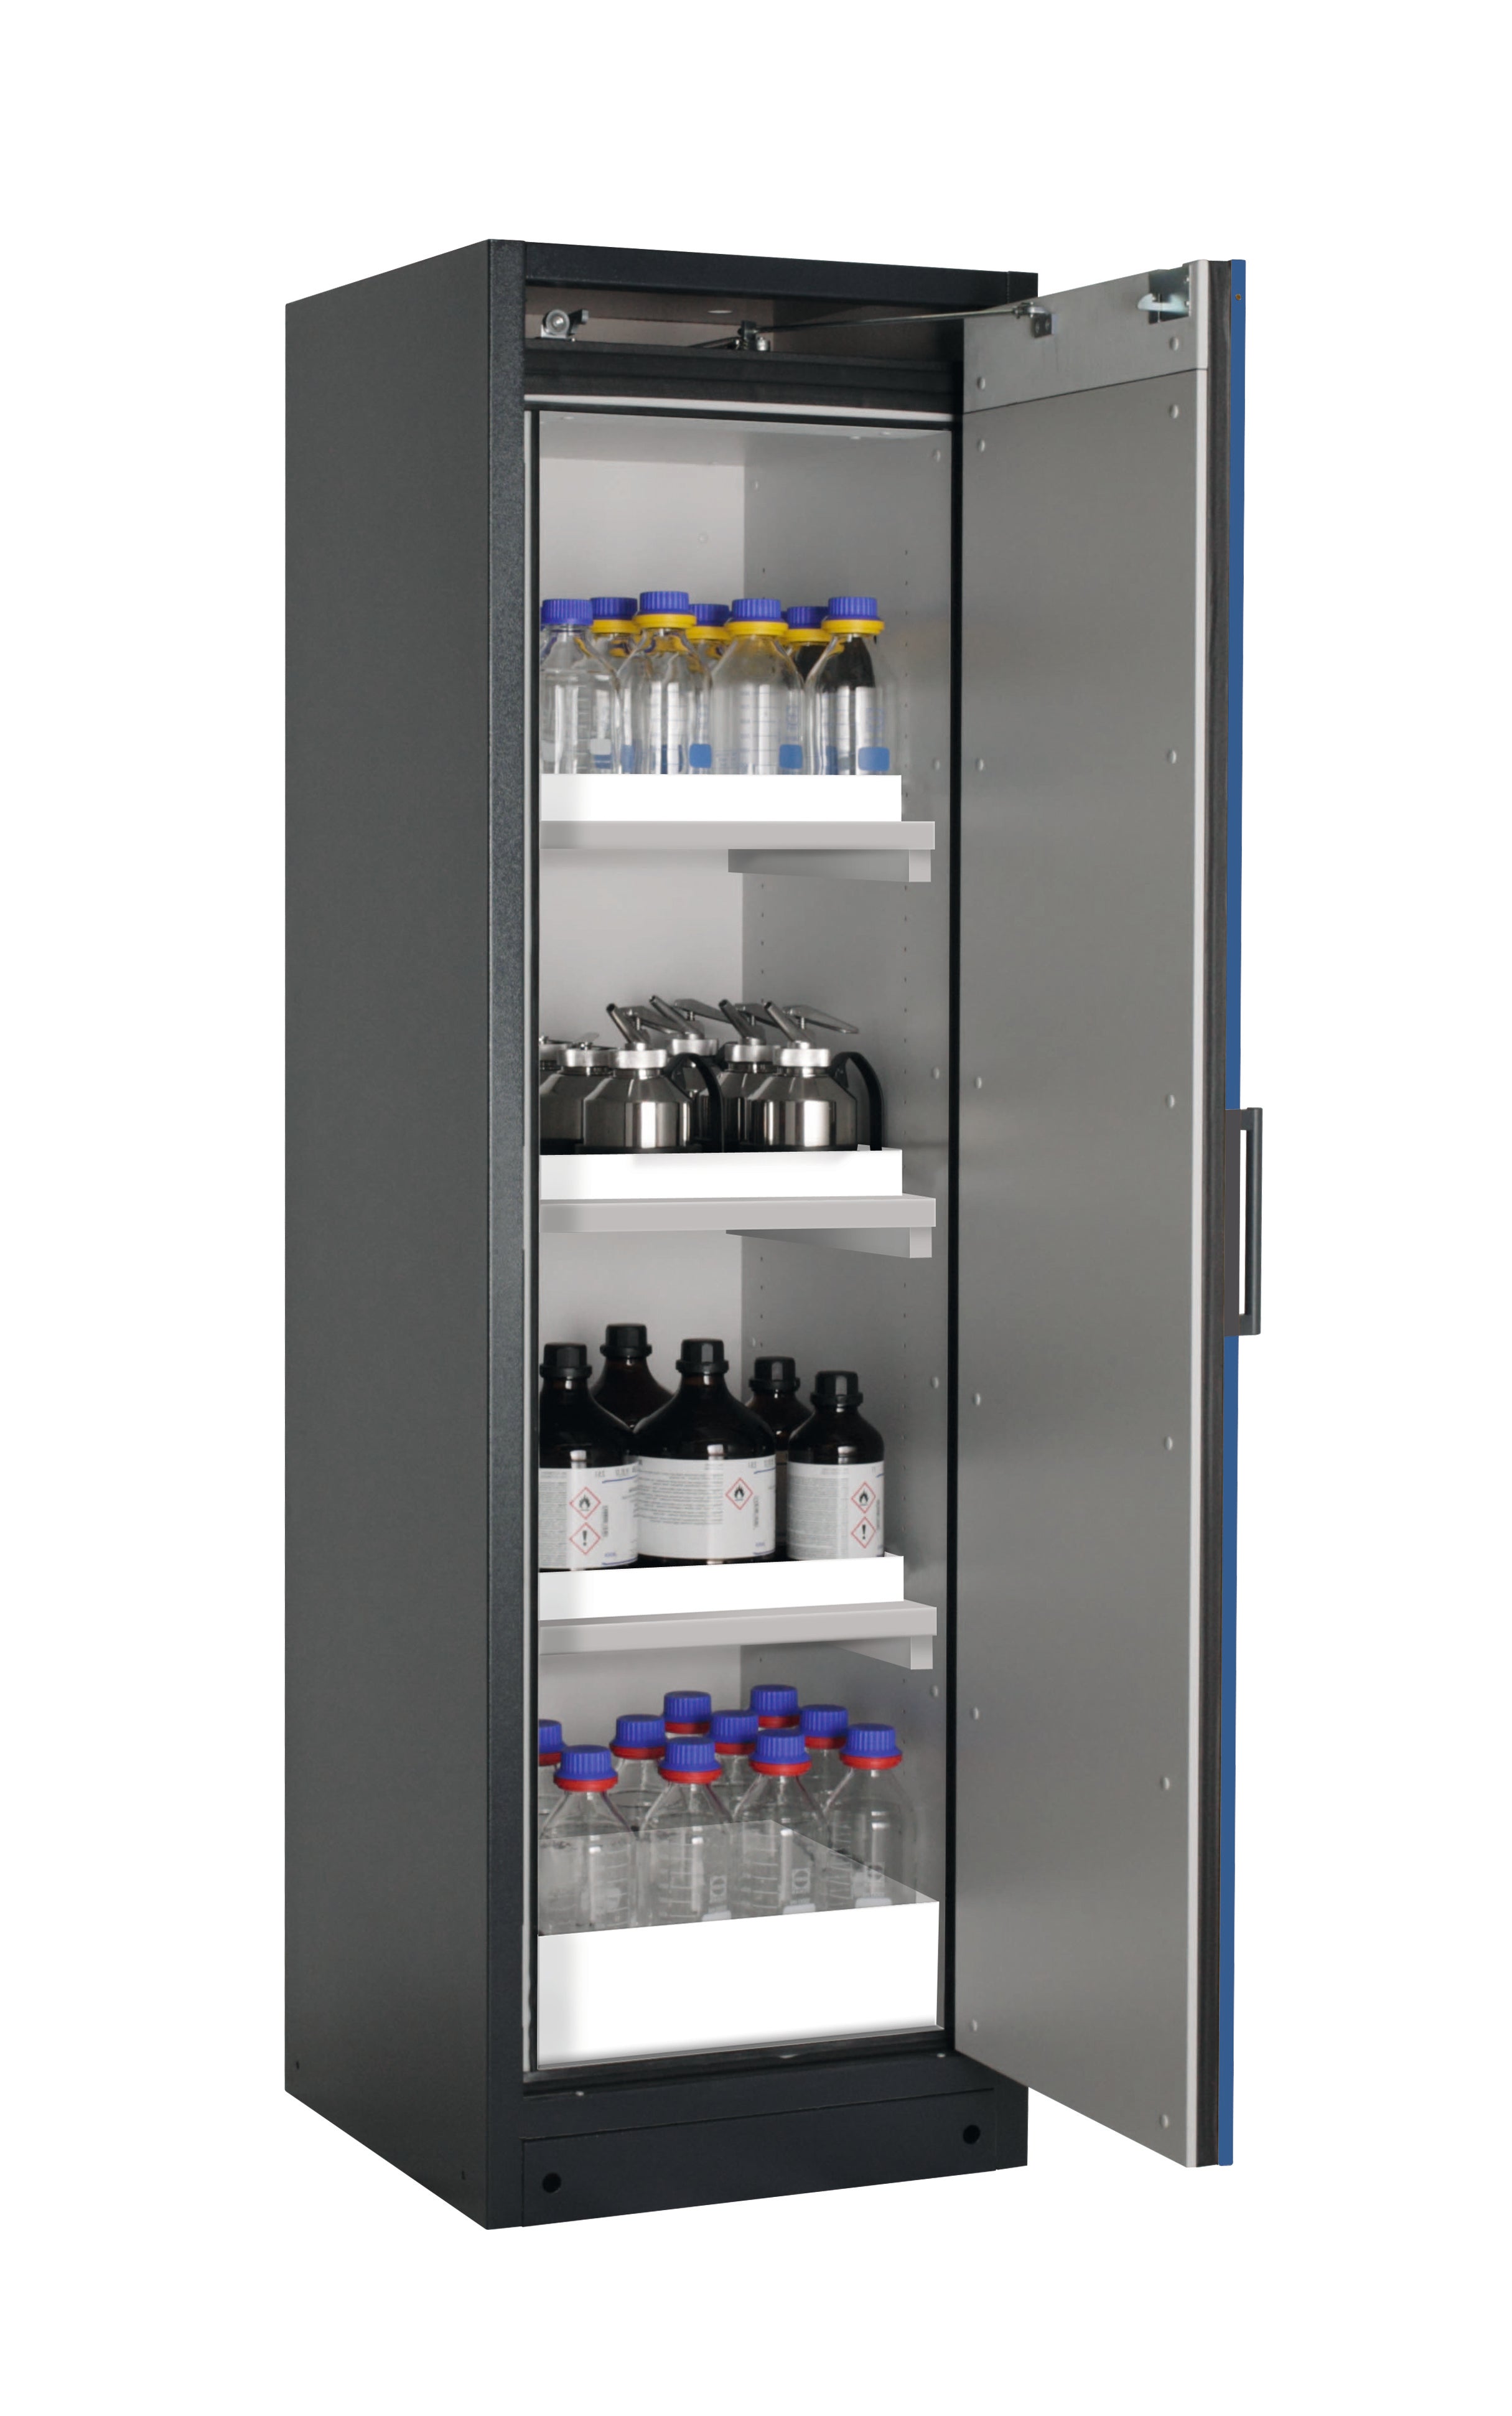 Type 90 safety storage cabinet Q-CLASSIC-90 model Q90.195.060.R in gentian blue RAL 5010 with 3x tray shelf (standard) (polypropylene),